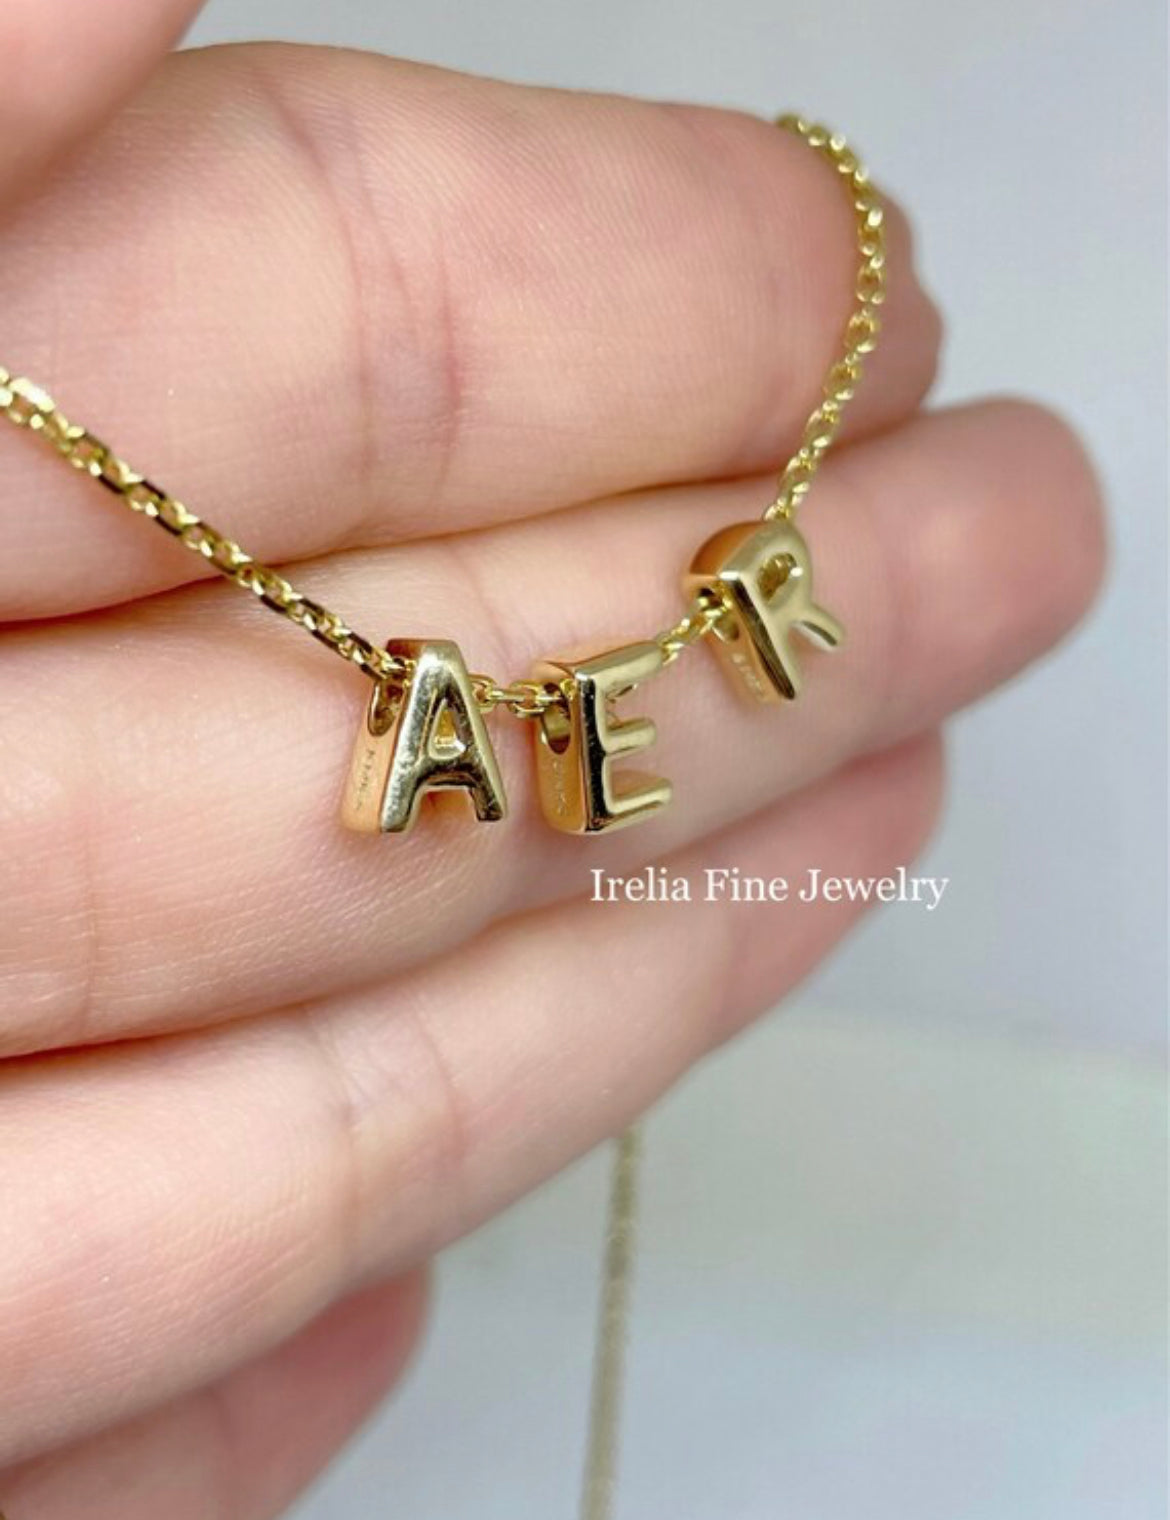 14k Gold Alphabet Charms – Front General Store